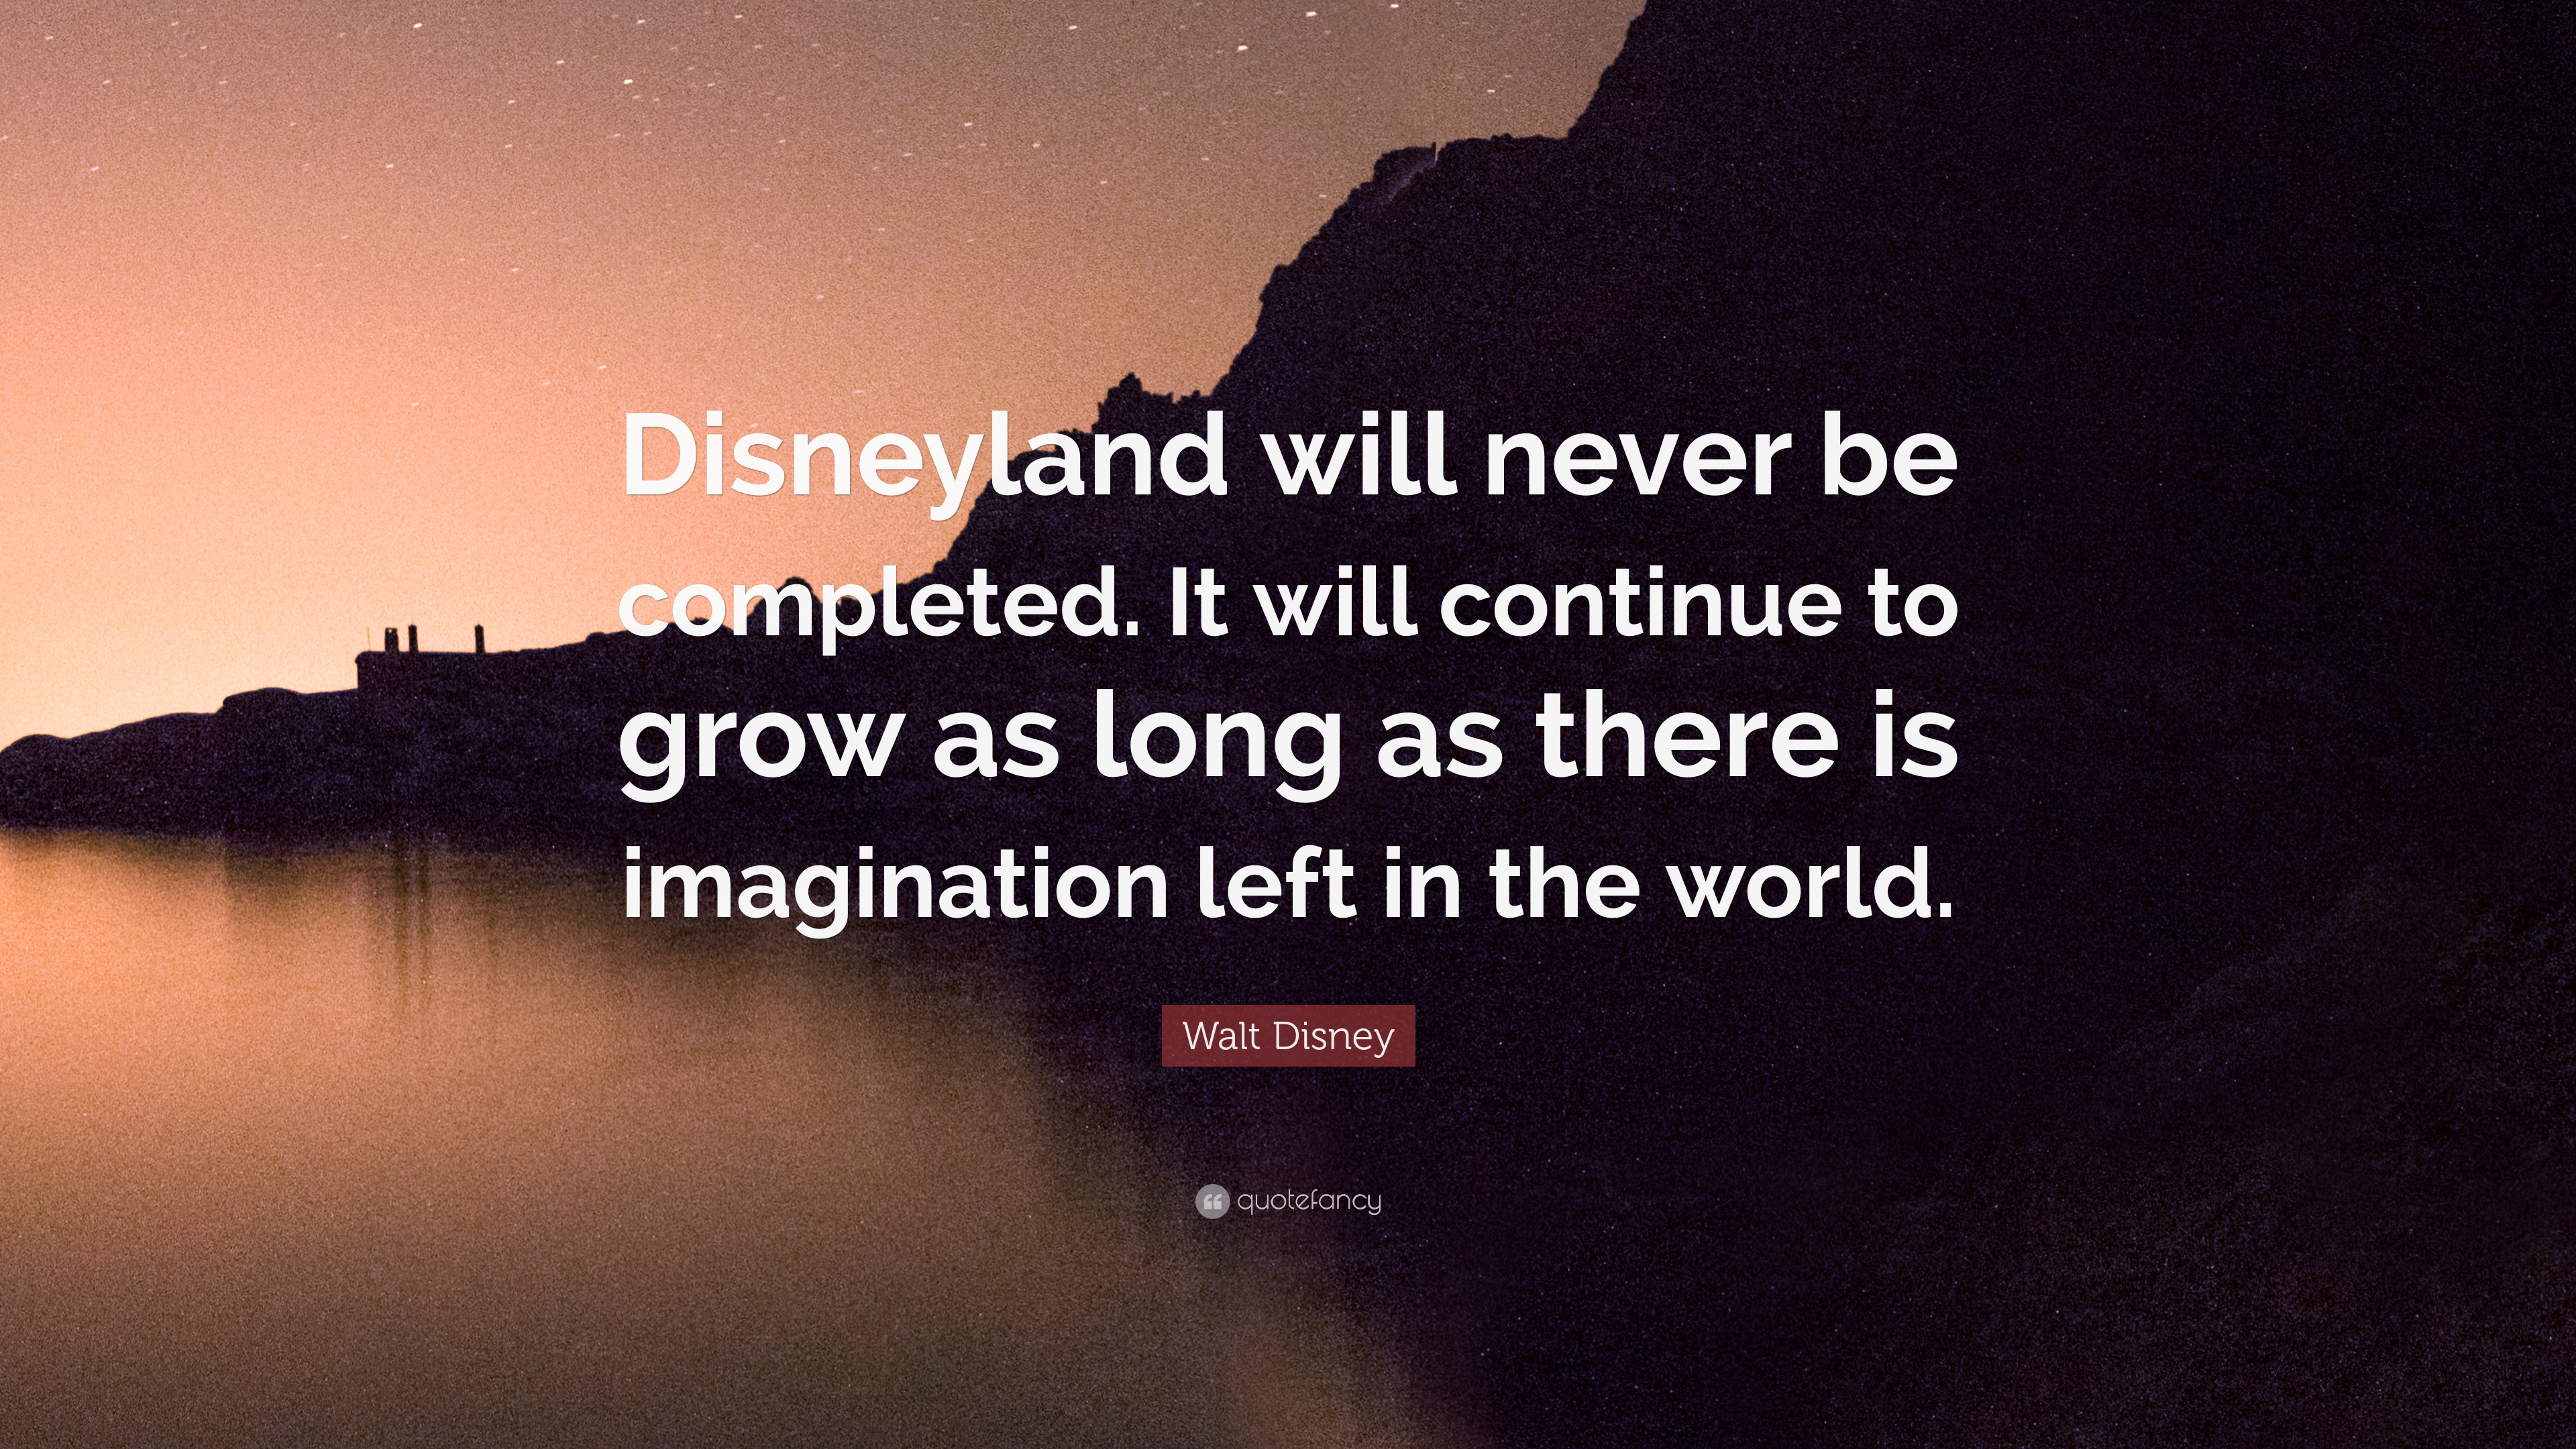 Walt Disney Quote “Disneyland will never be pleted It will continue to grow